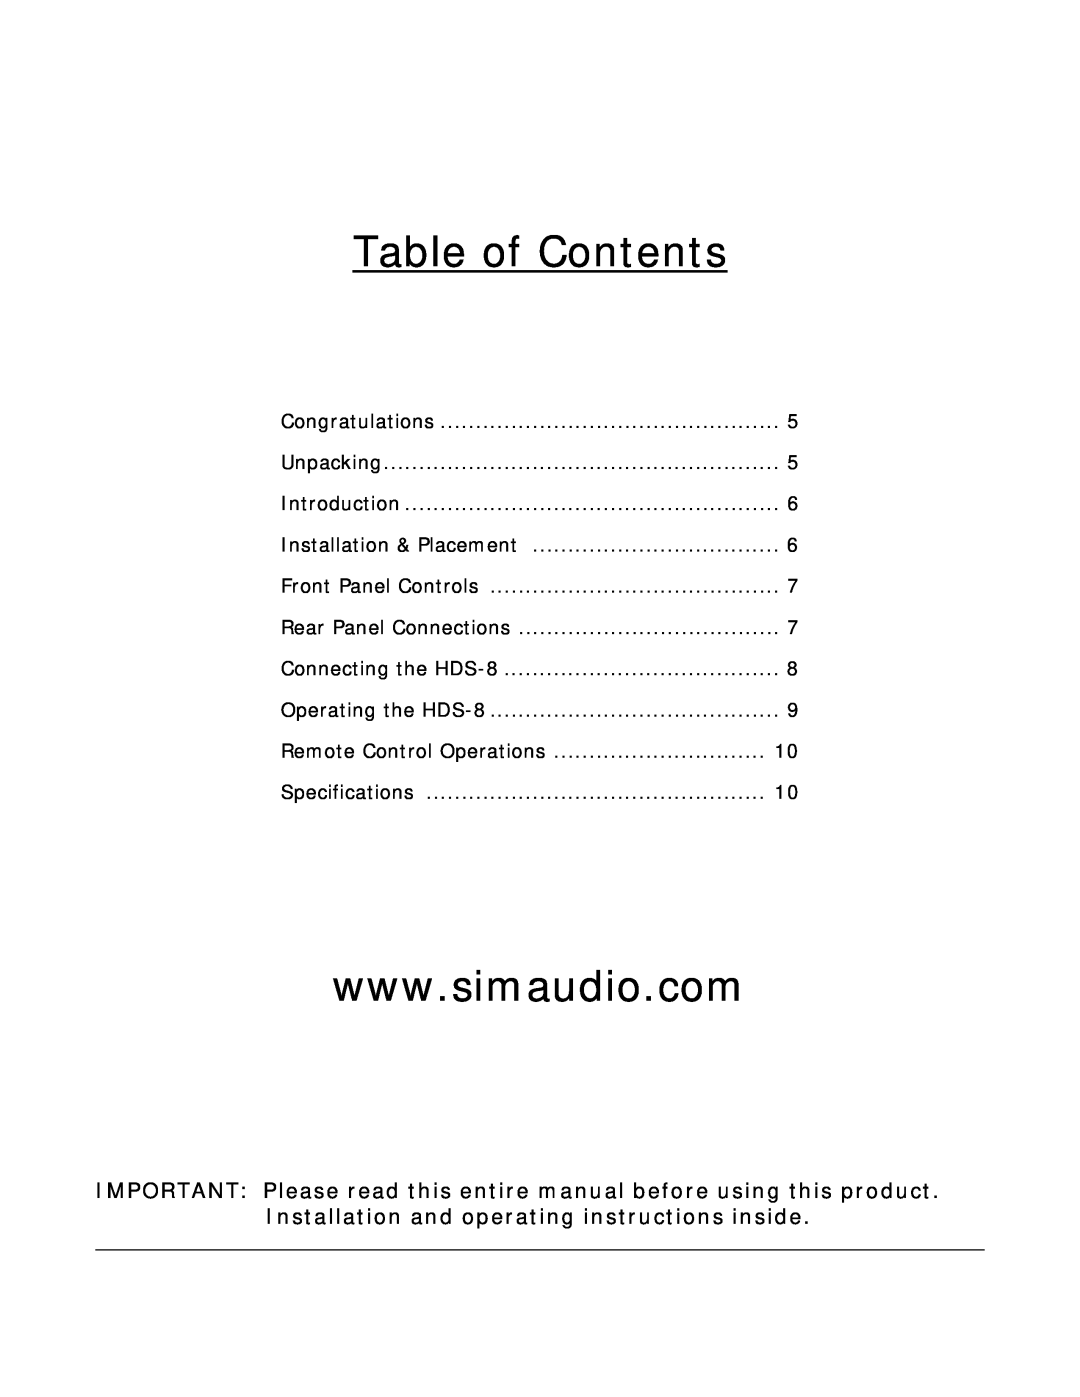 Simaudio HDS-8 owner manual Table of Contents 